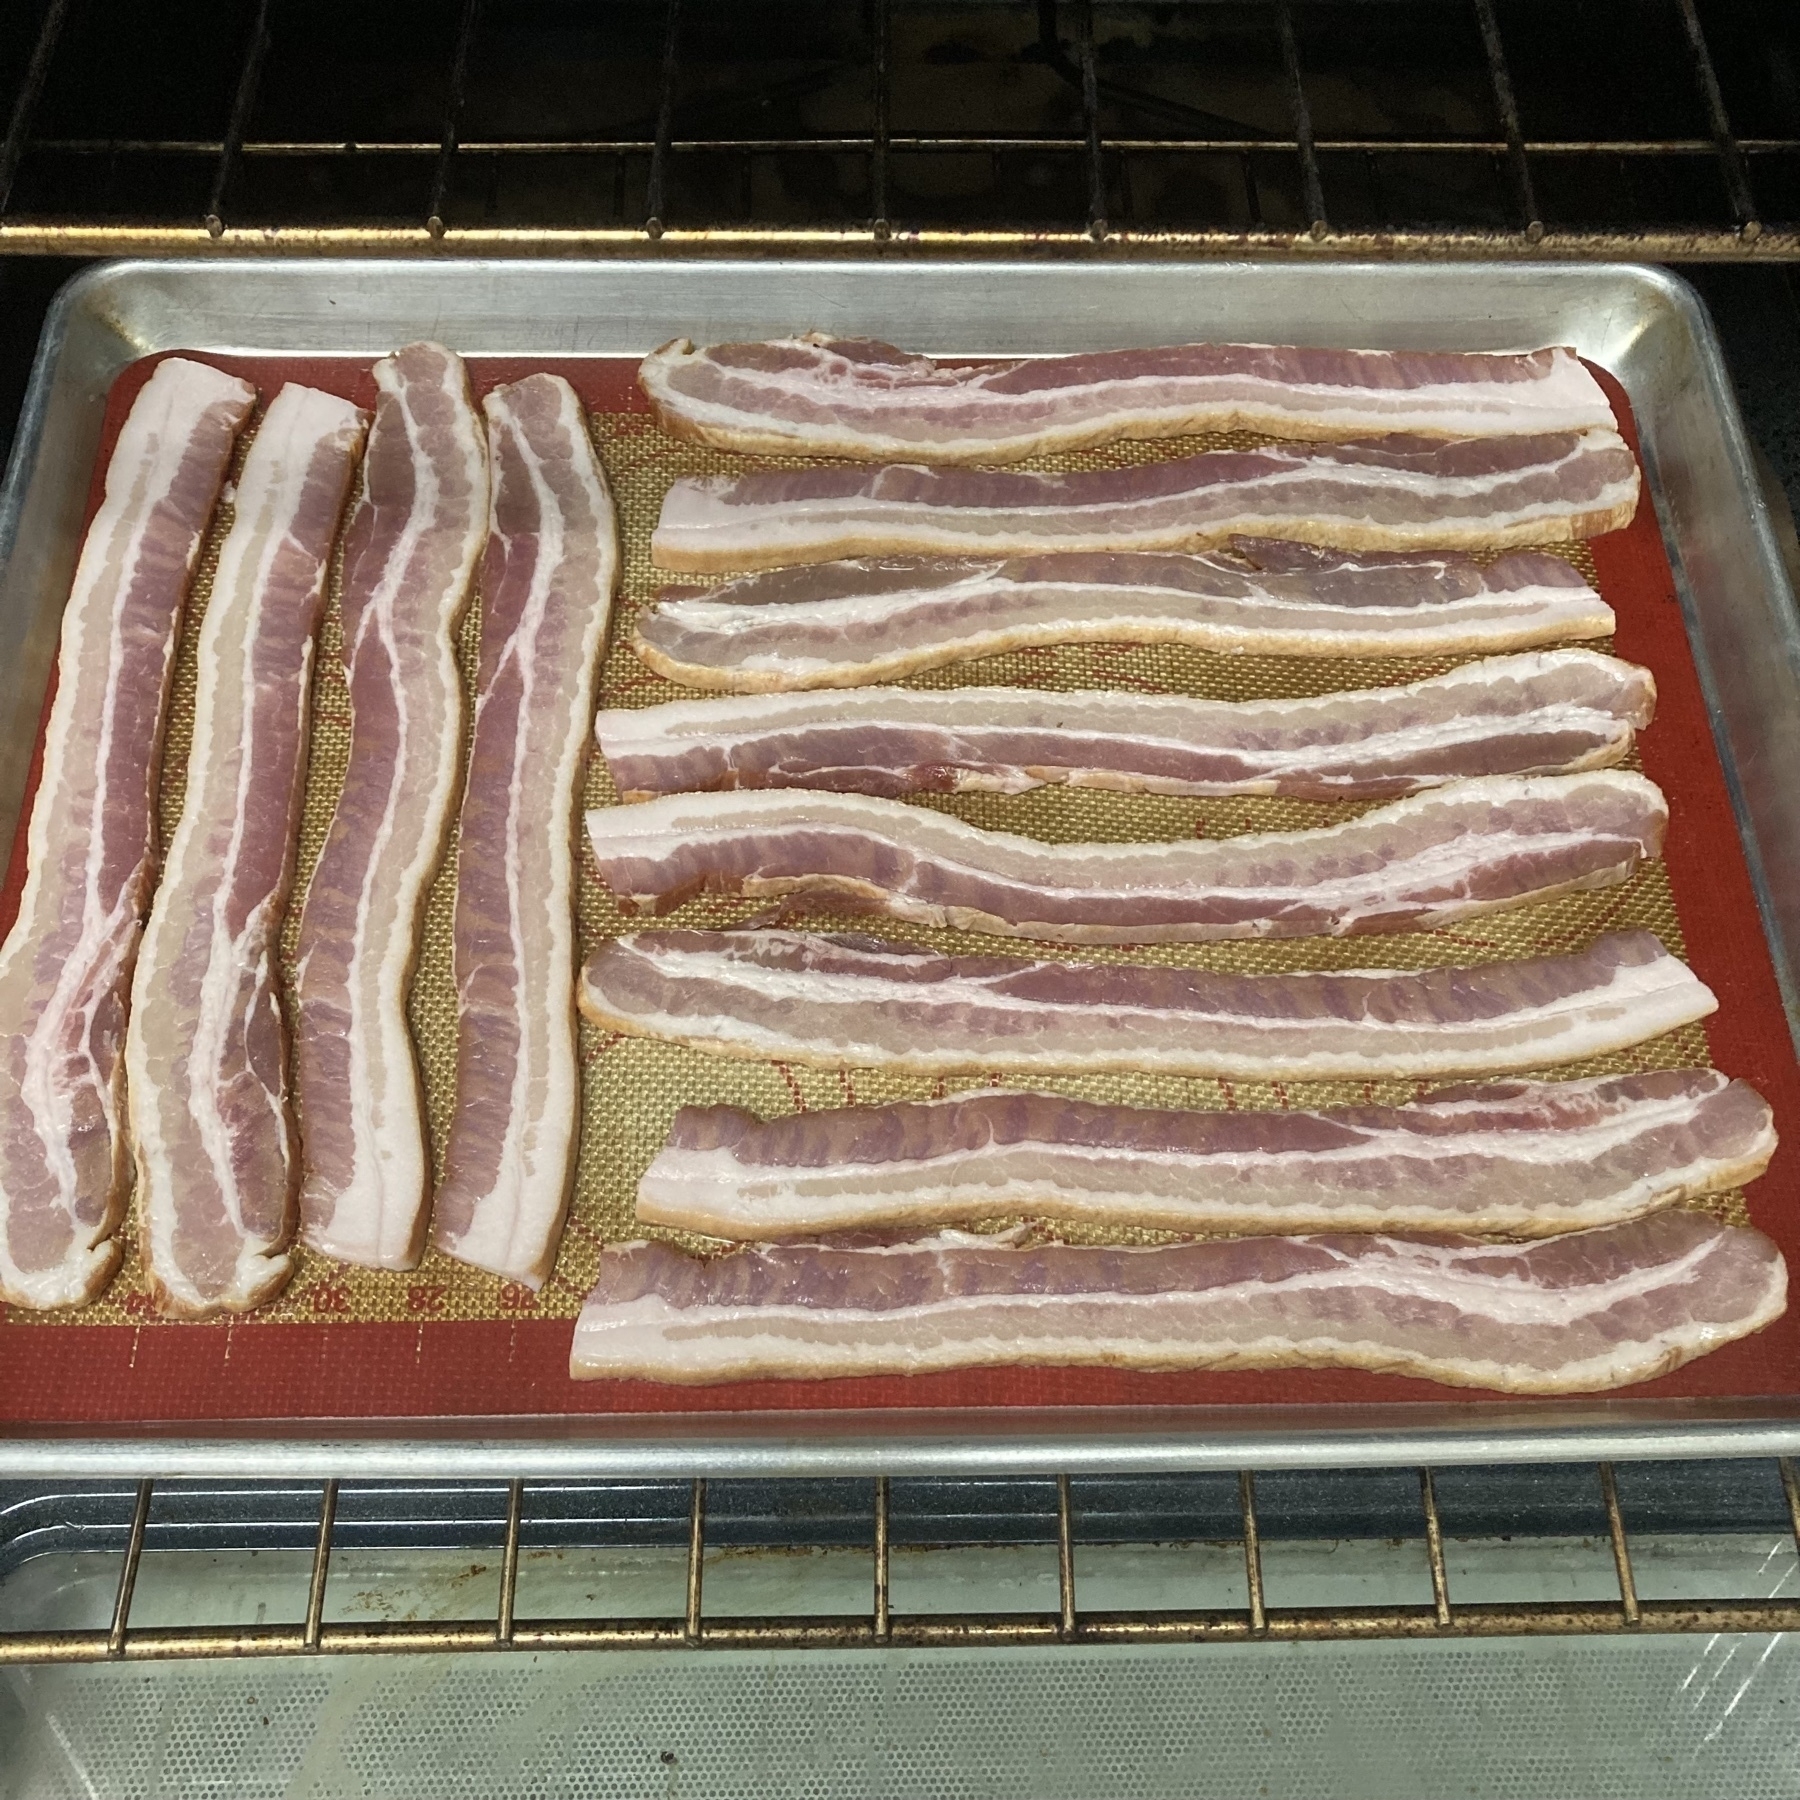 Bacon strips in the oven. 